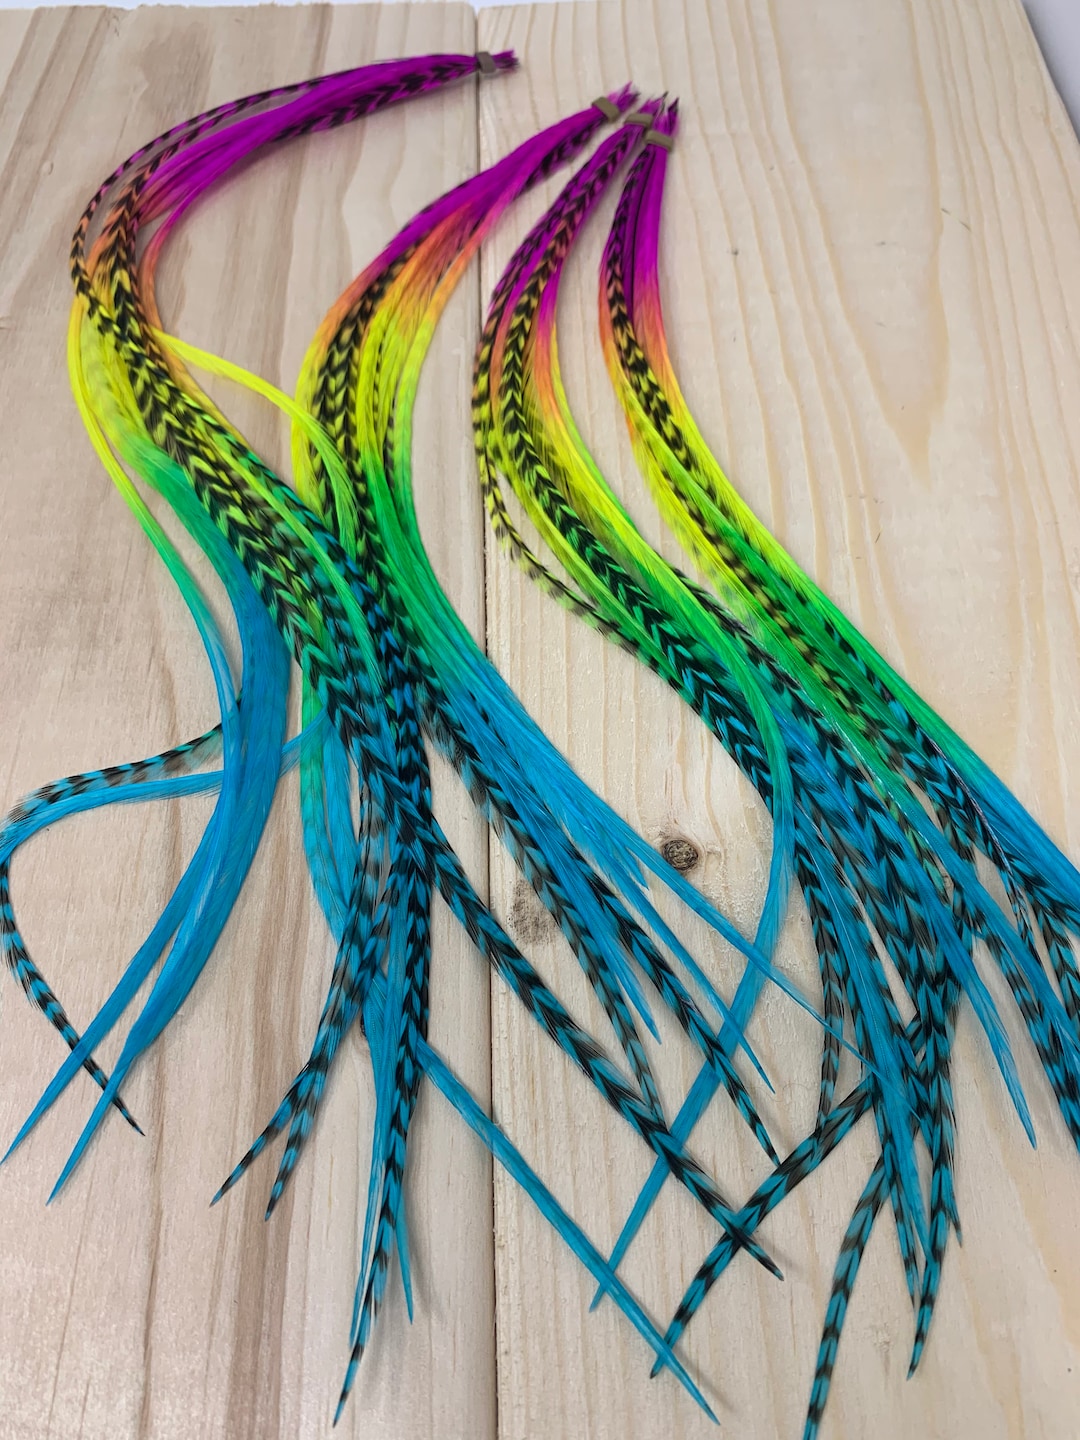 Sale Real Feather Hair Extensions 8 Long Hair Feathers - Colorful Bright Grizzly Streamer Feather Extensions 9-11inch Rainbow Rave Feathers